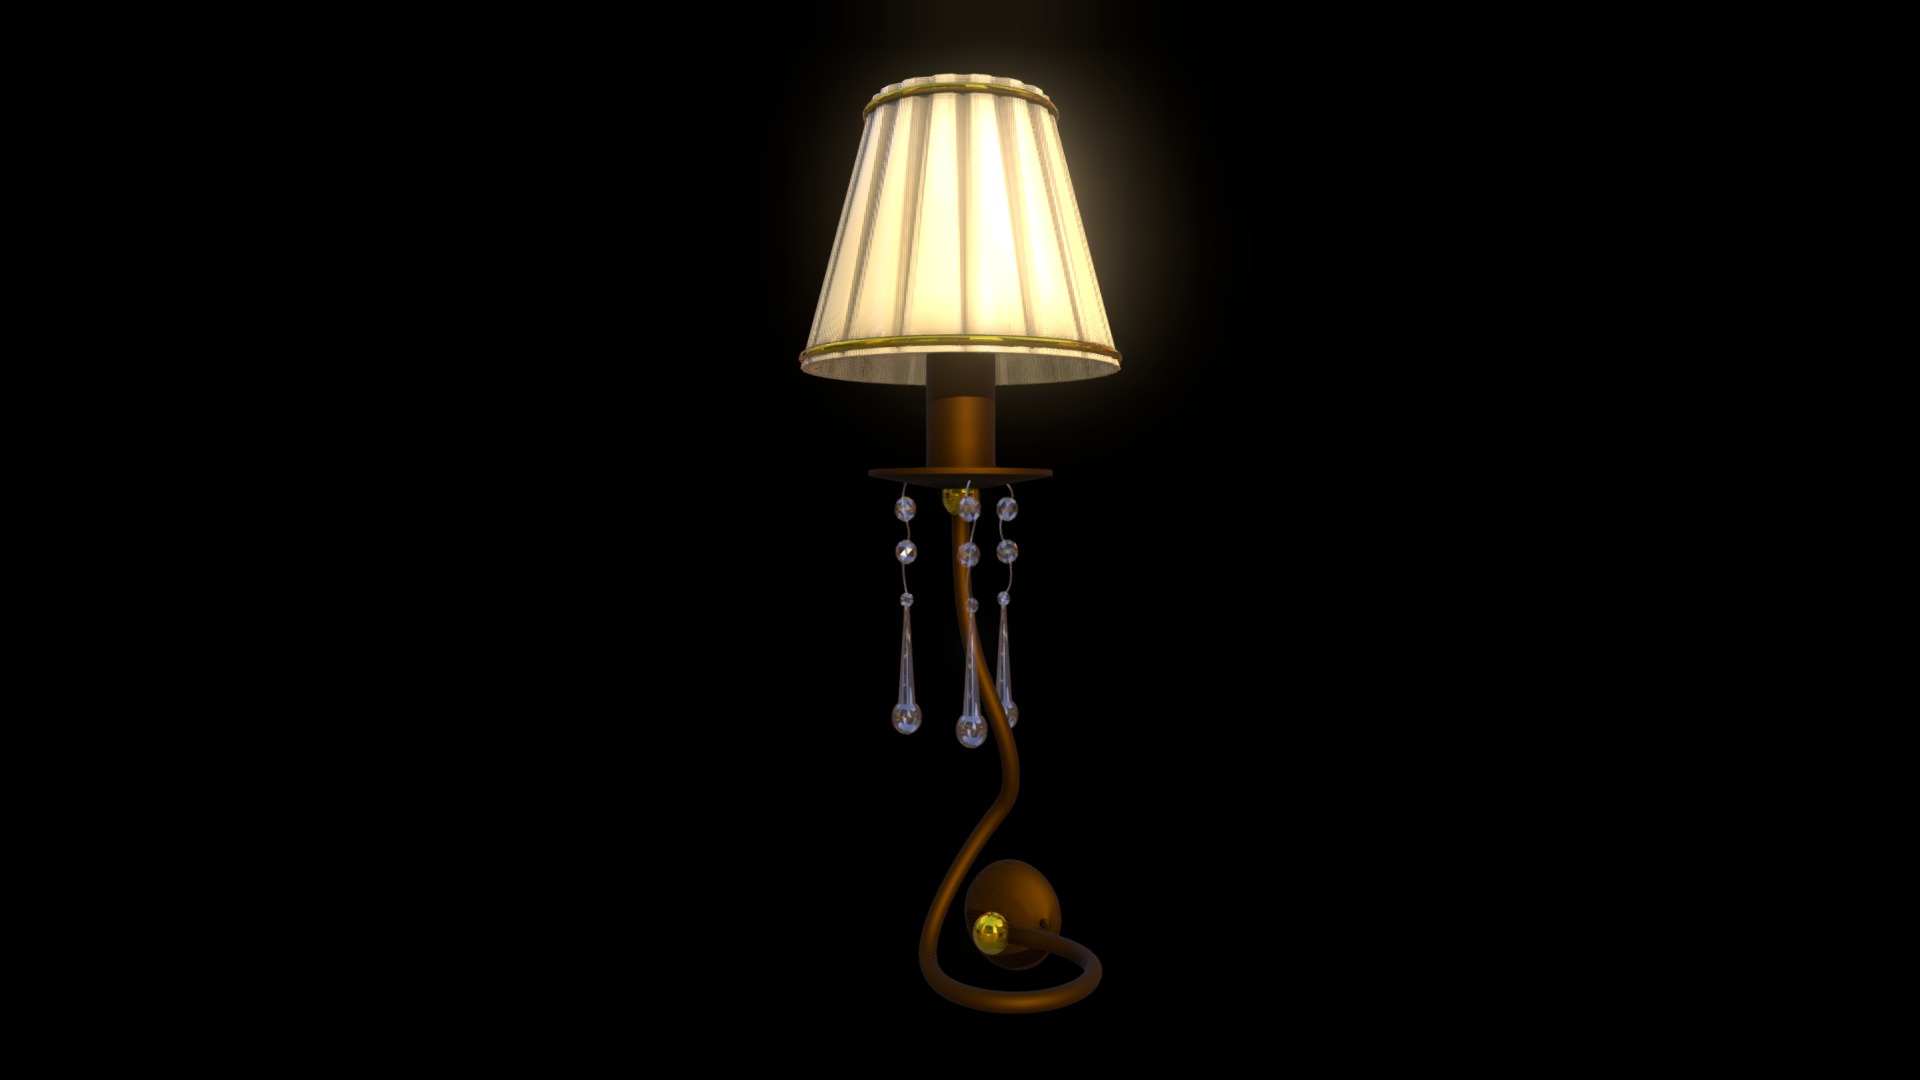 3D model HGPAH30 - This is a 3D model of the HGPAH30. The 3D model is about a lamp with lights.